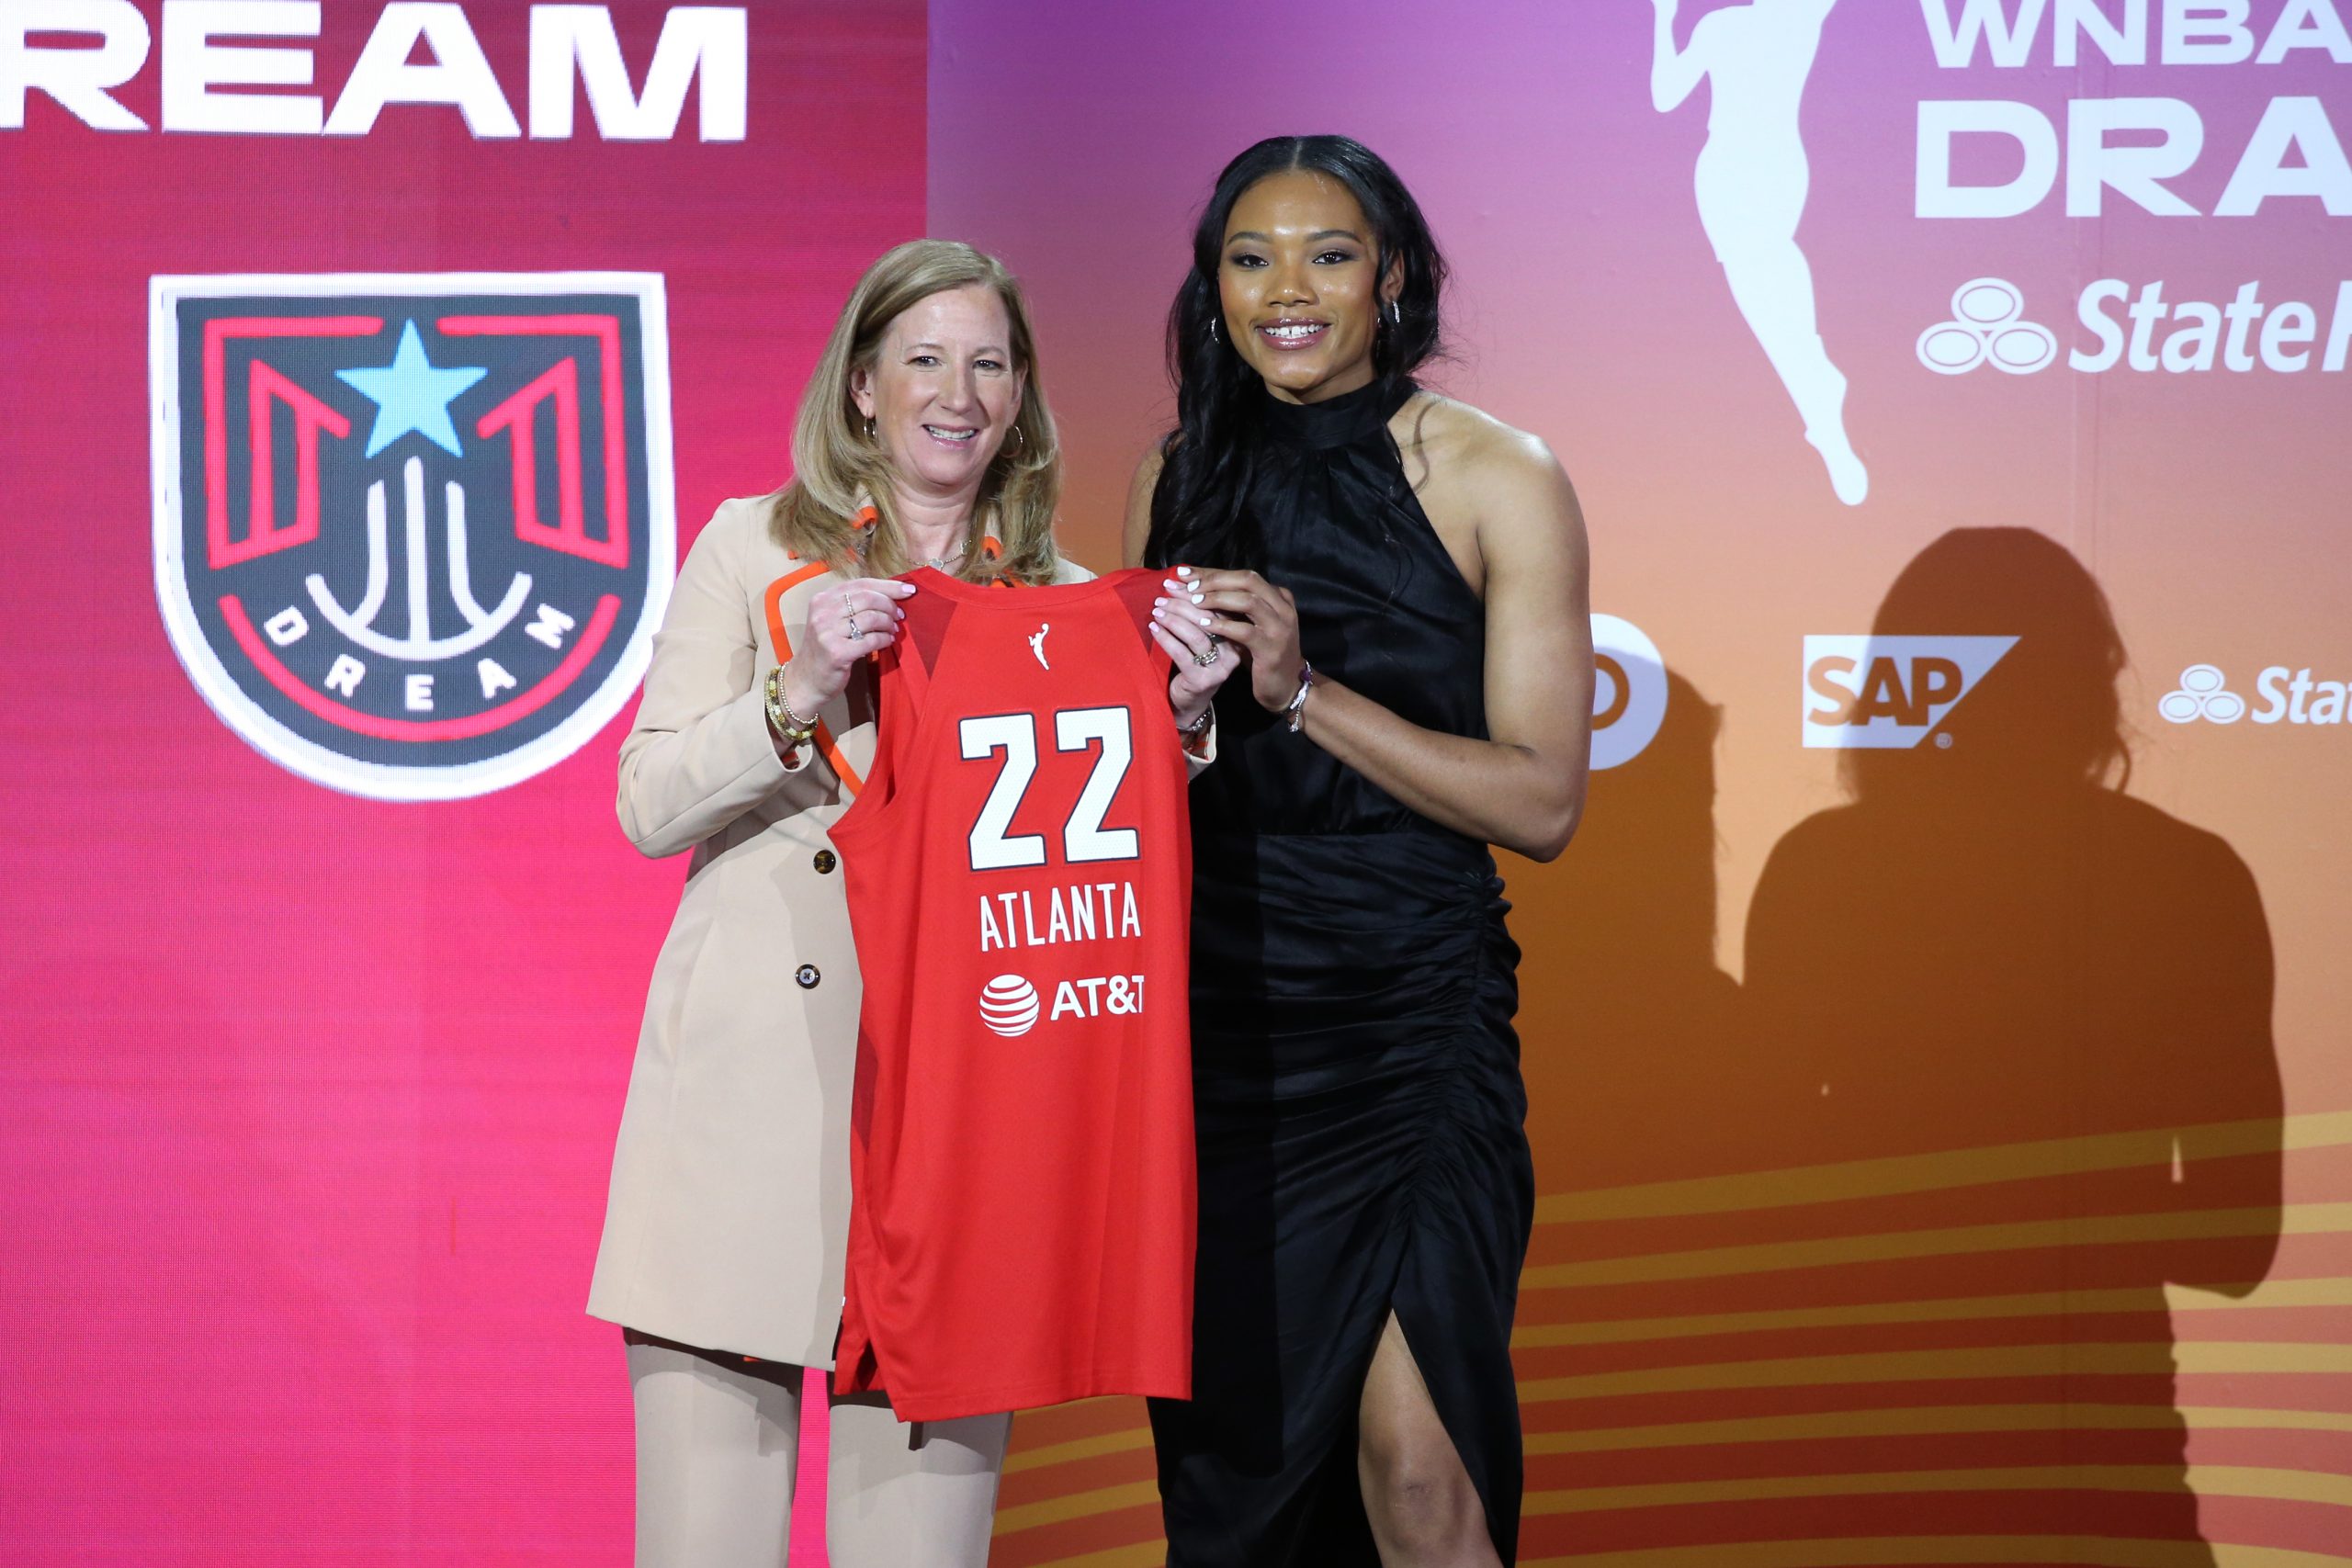 Rookie Naz Hillmon is Ready to Embrace Her Role on the Atlanta Dream